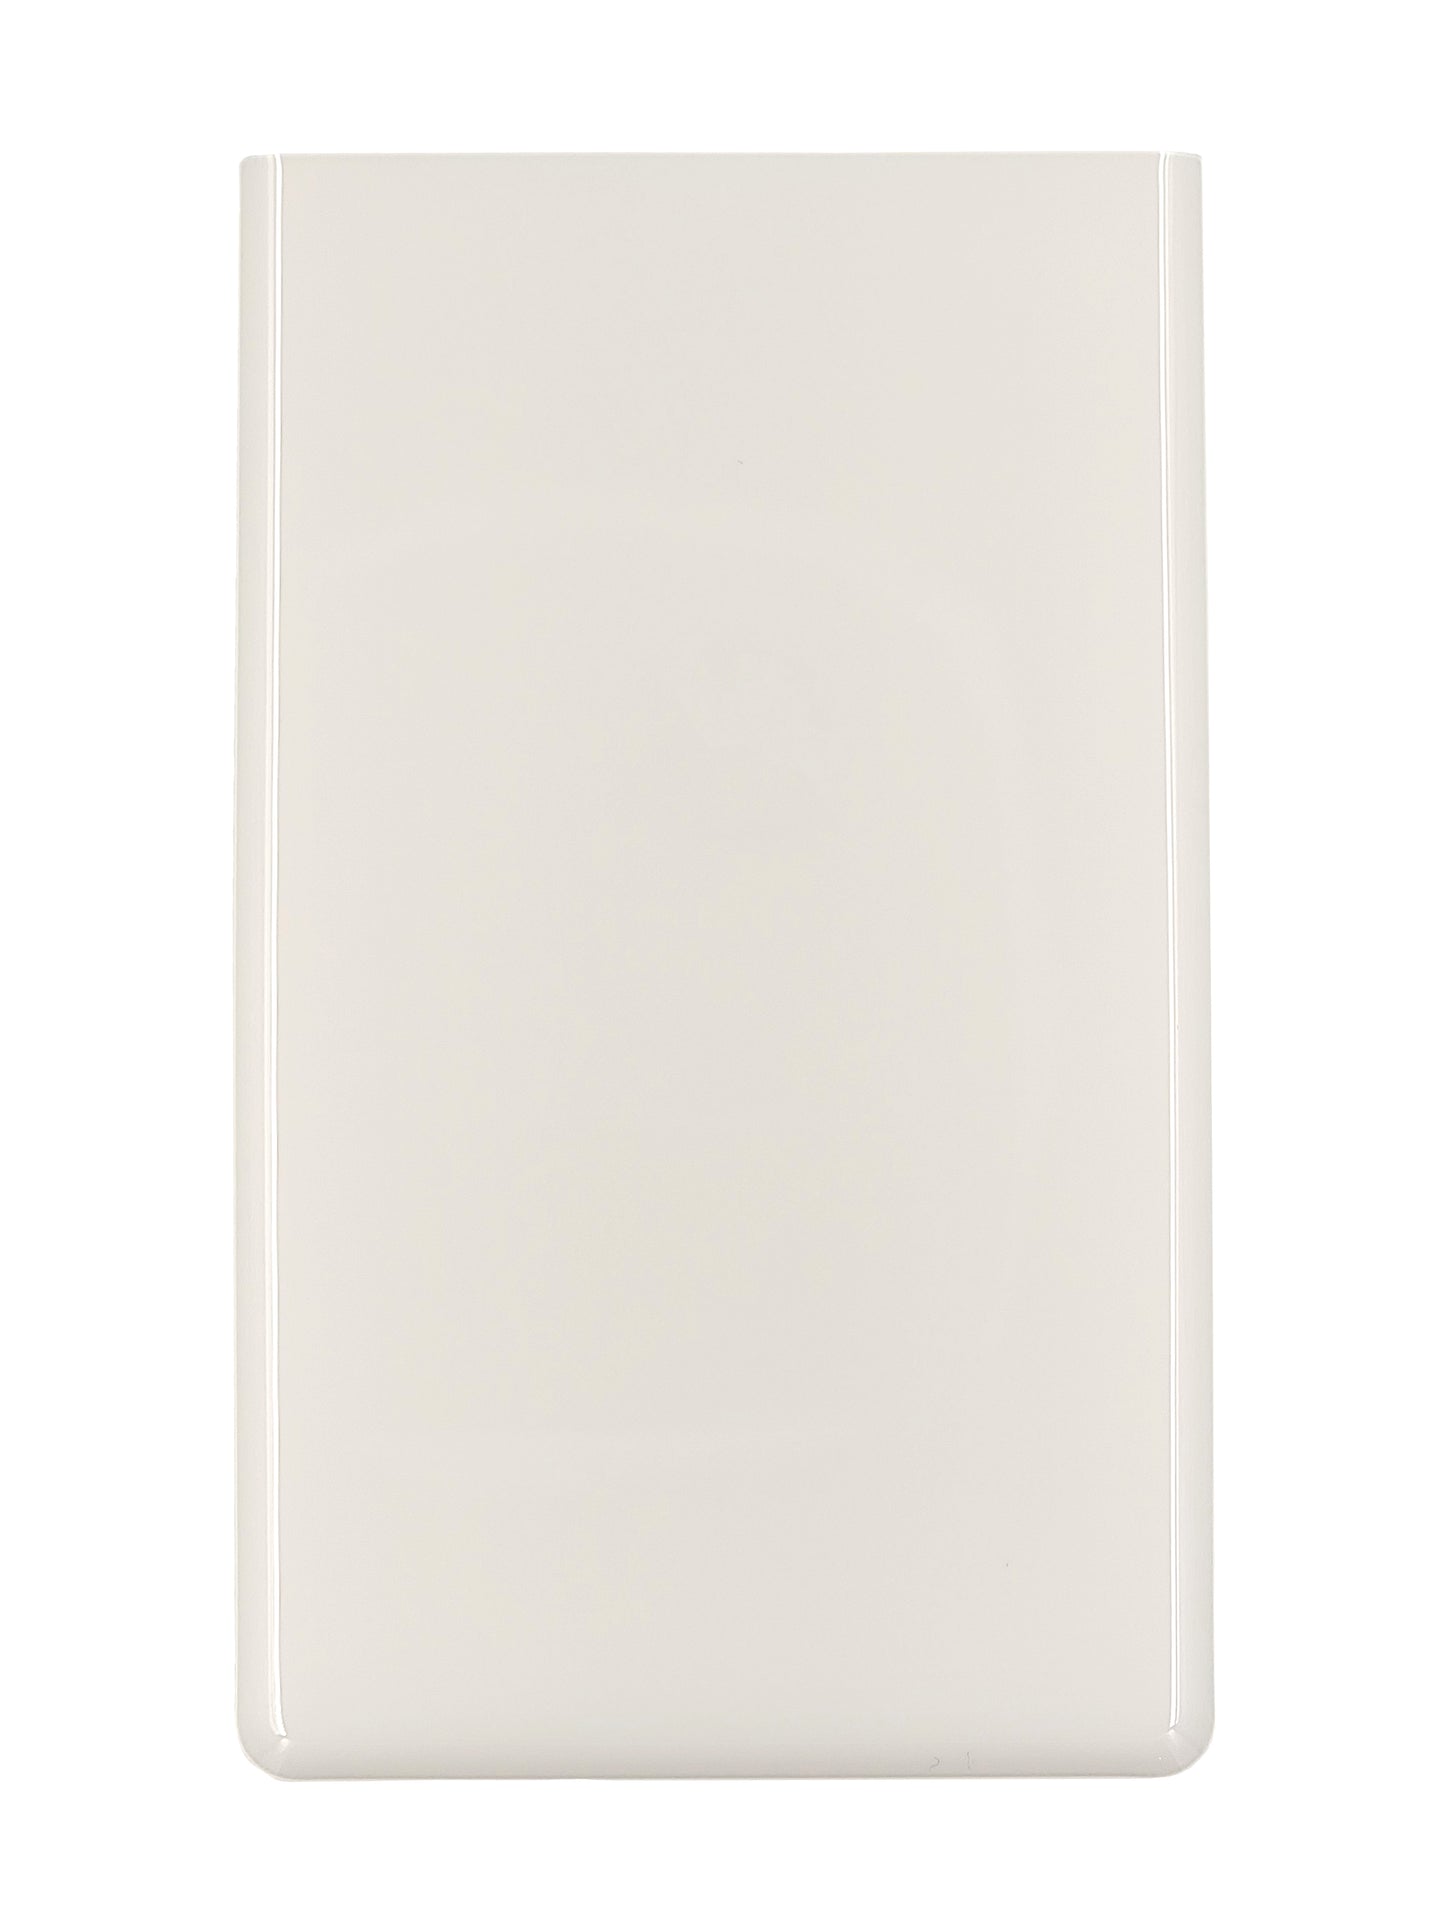 GOP Pixel 6 Pro Back Cover (Cloudy White)